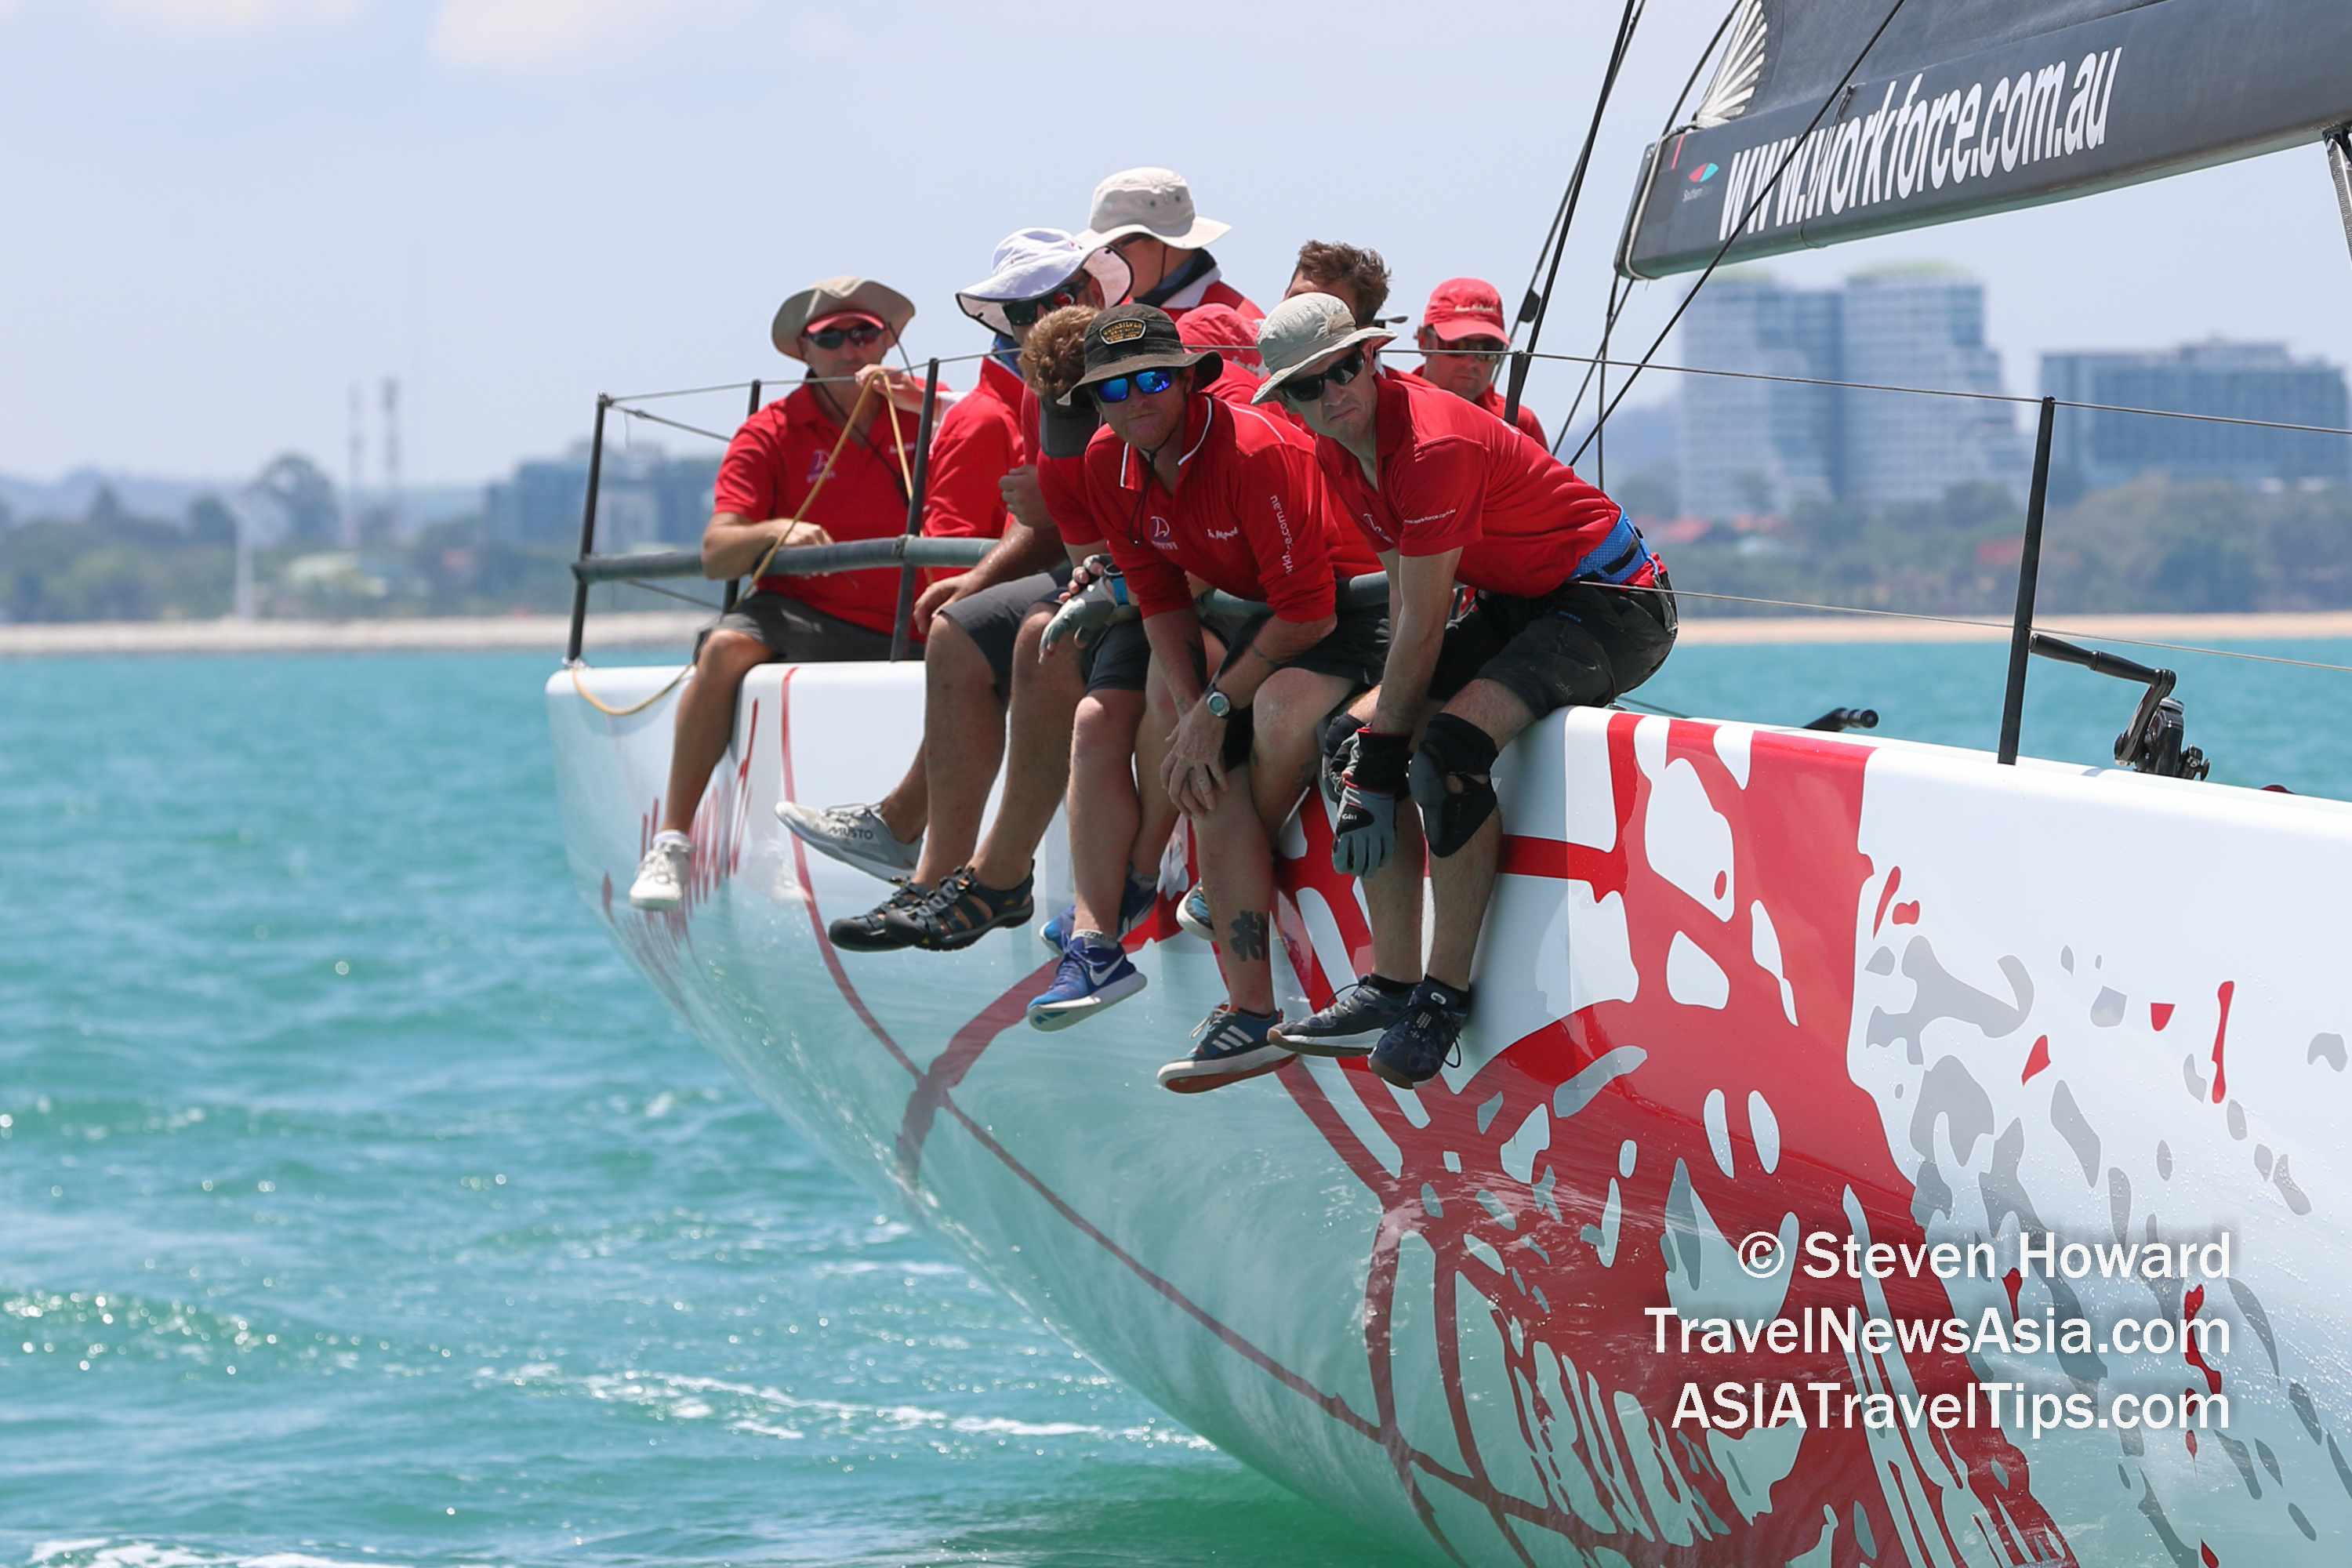 Team Hollywood competing in the Top of the Gulf Regatta in Jomtien, Pattaya, Thailand earlier this year. Picture by Steven Howard of TravelNewsAsia.com Click to enlarge.